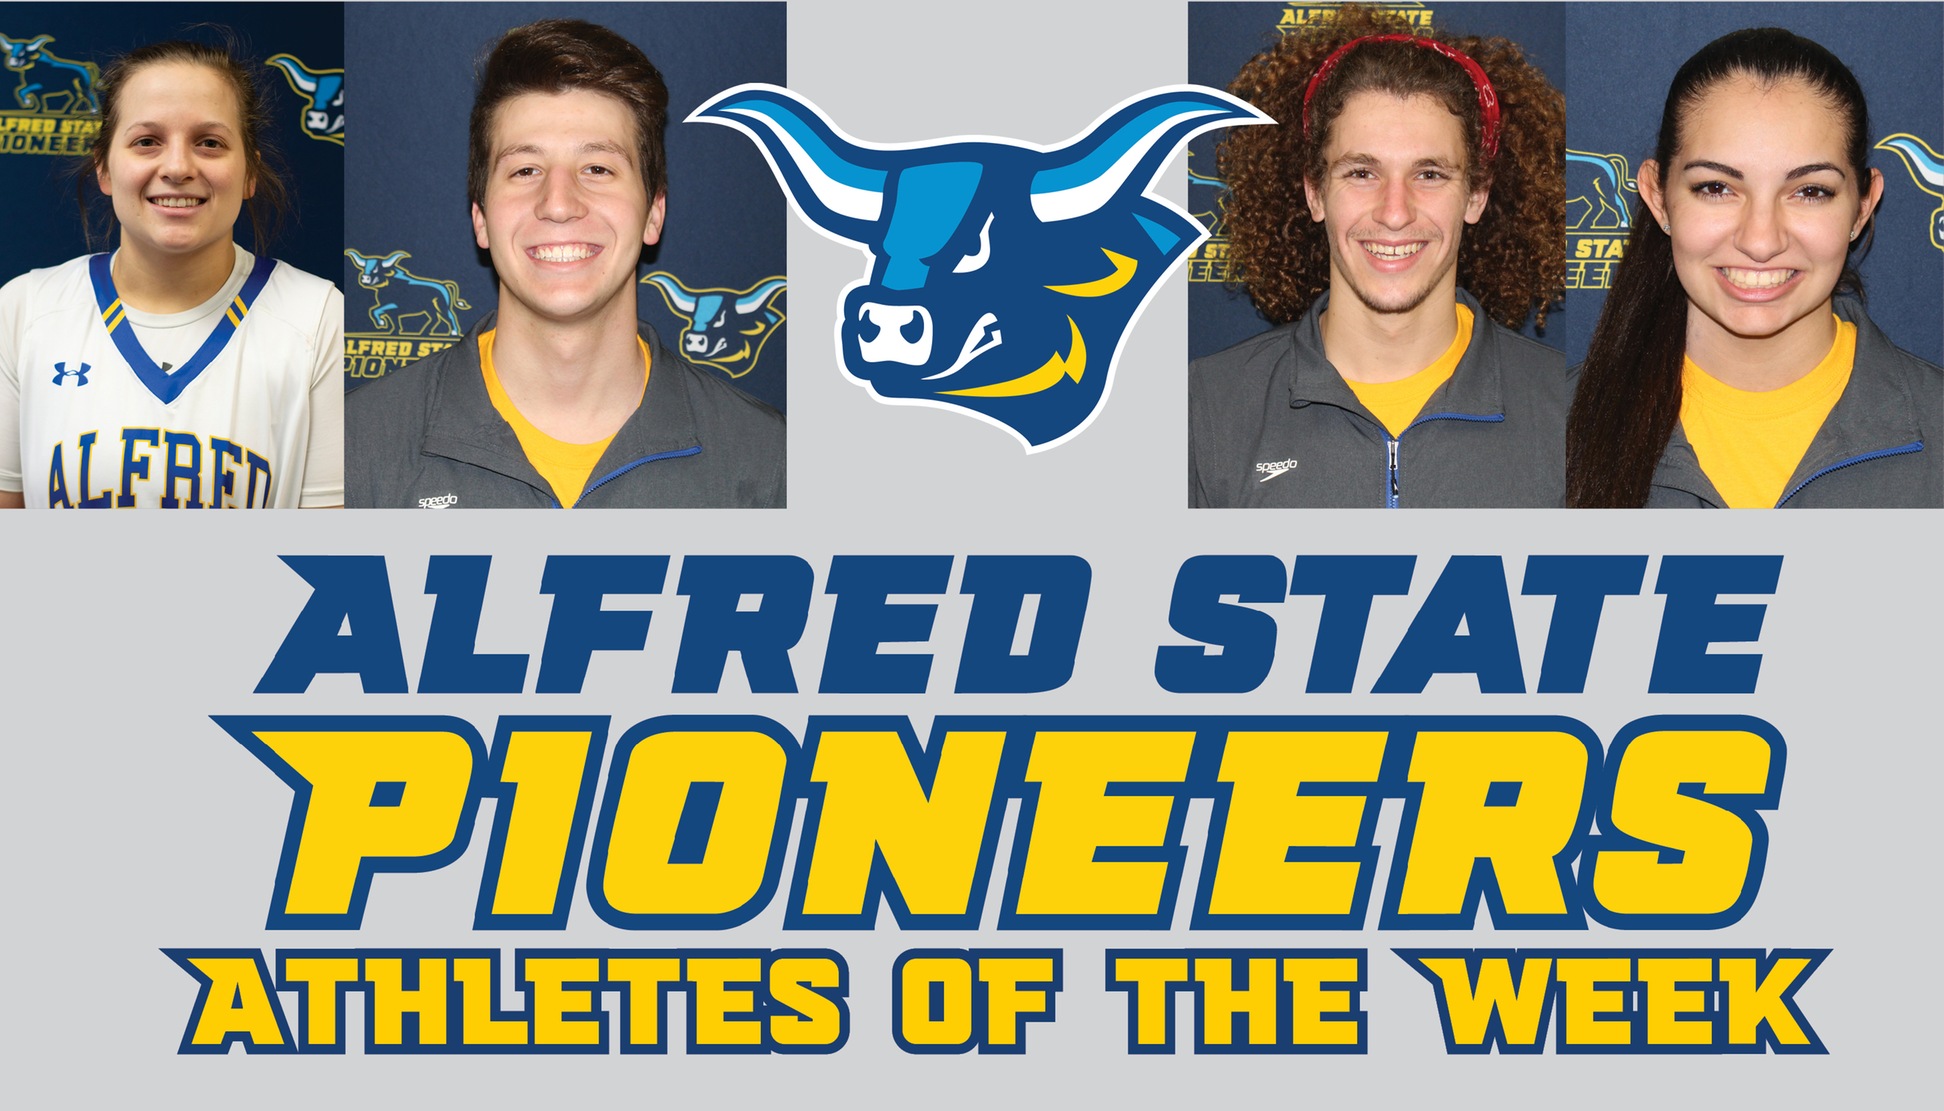 Anderson, Dale, Miller, and LaRue Named Athletes of the Week